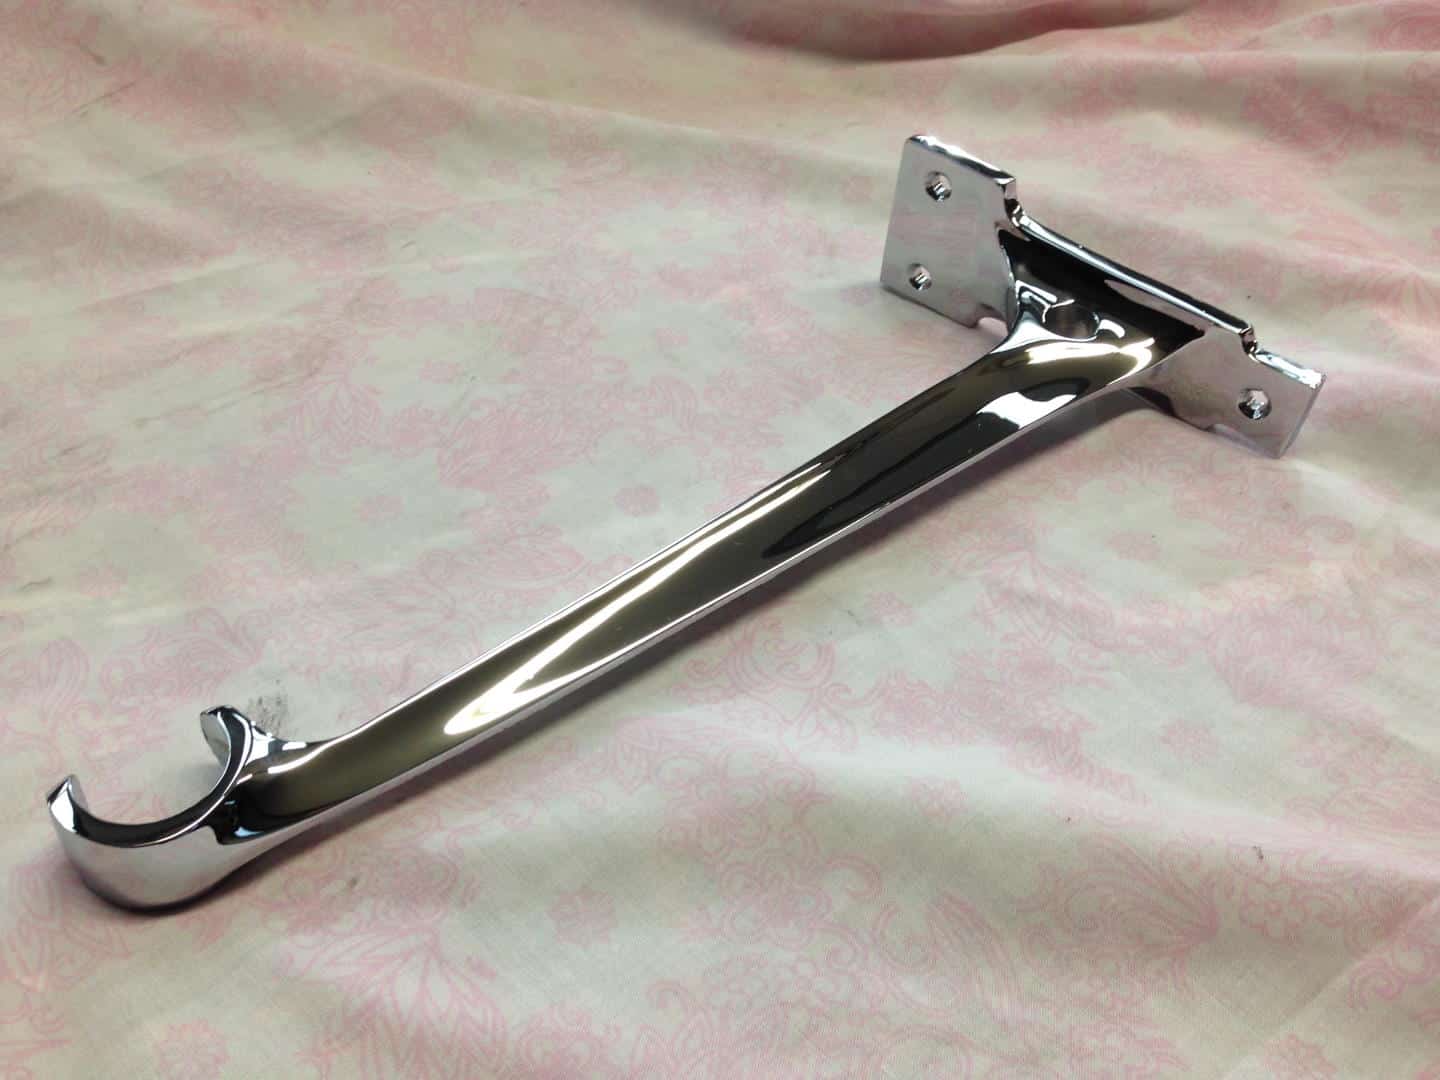 Canadian Pacific Project Chrome Luggage Rack Bracket // Credit The Watercress Line